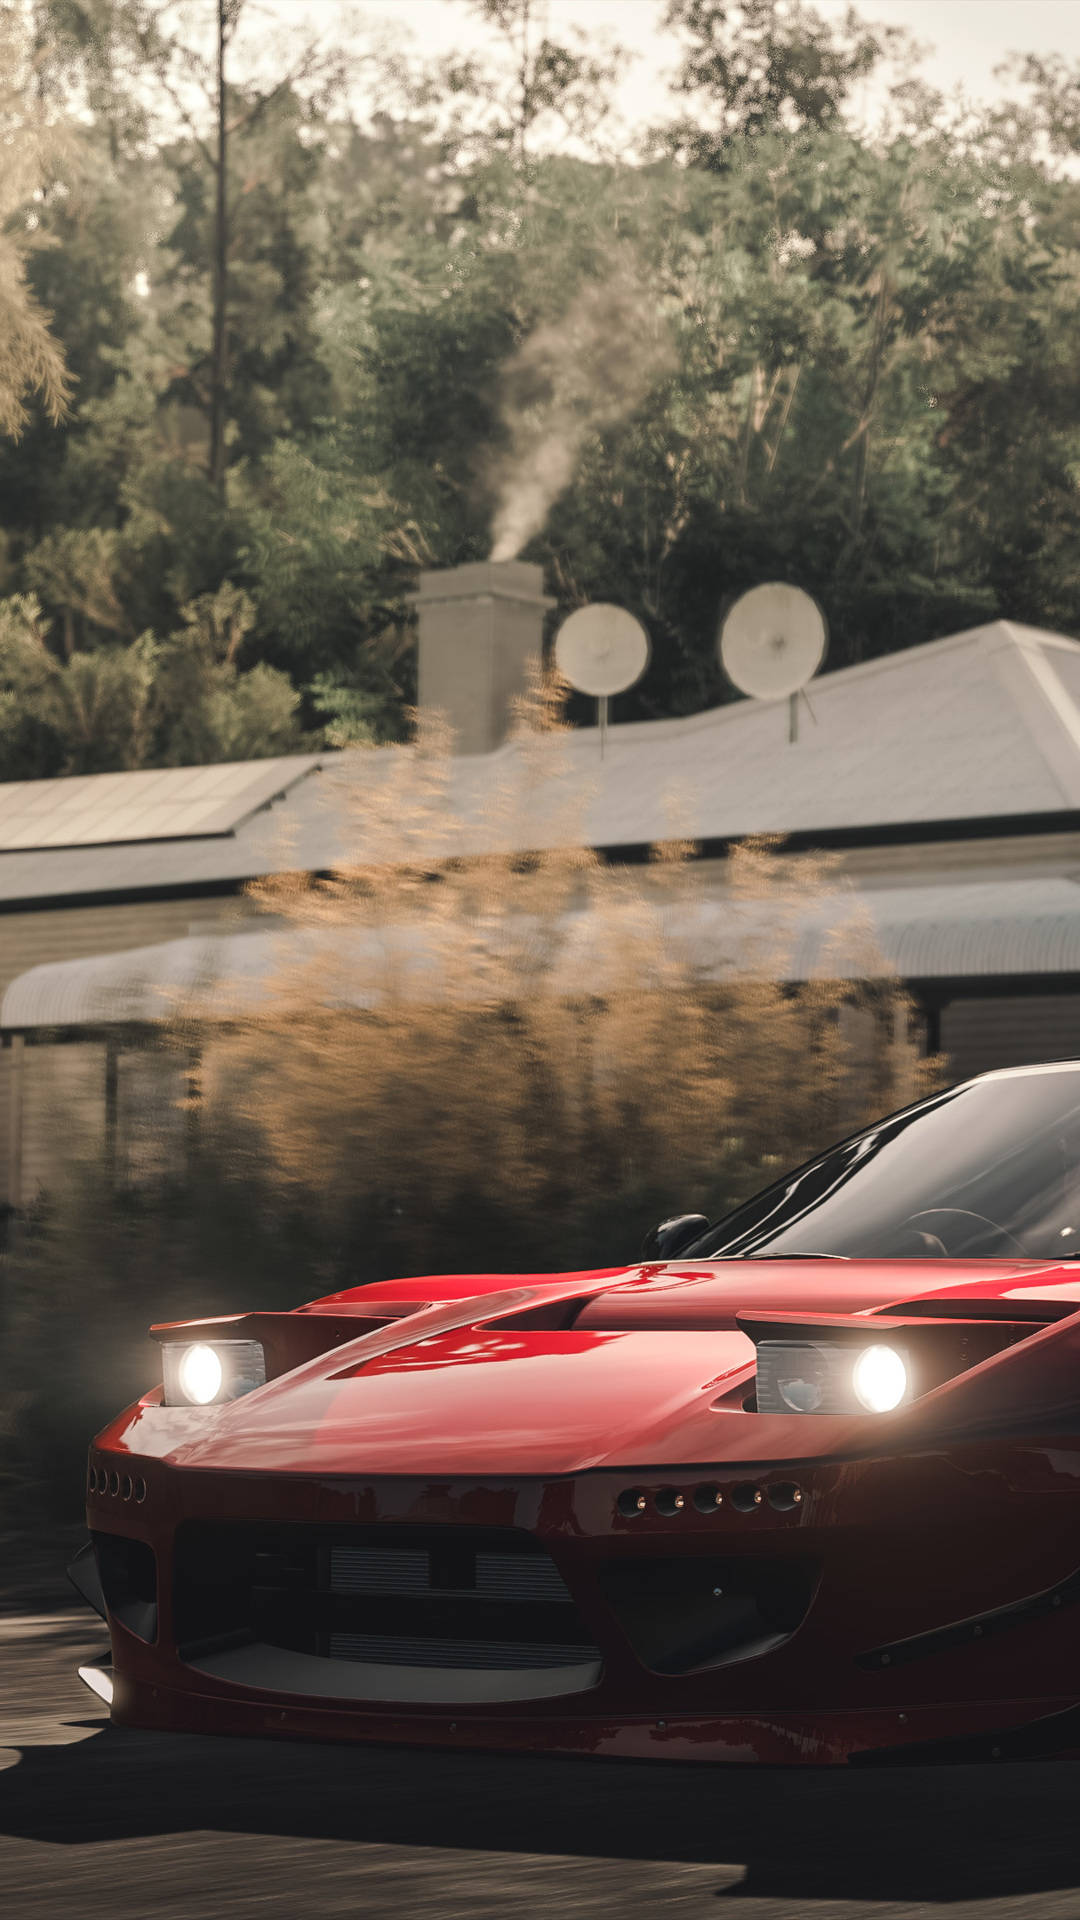 a red sports car driving down a road Wallpaper